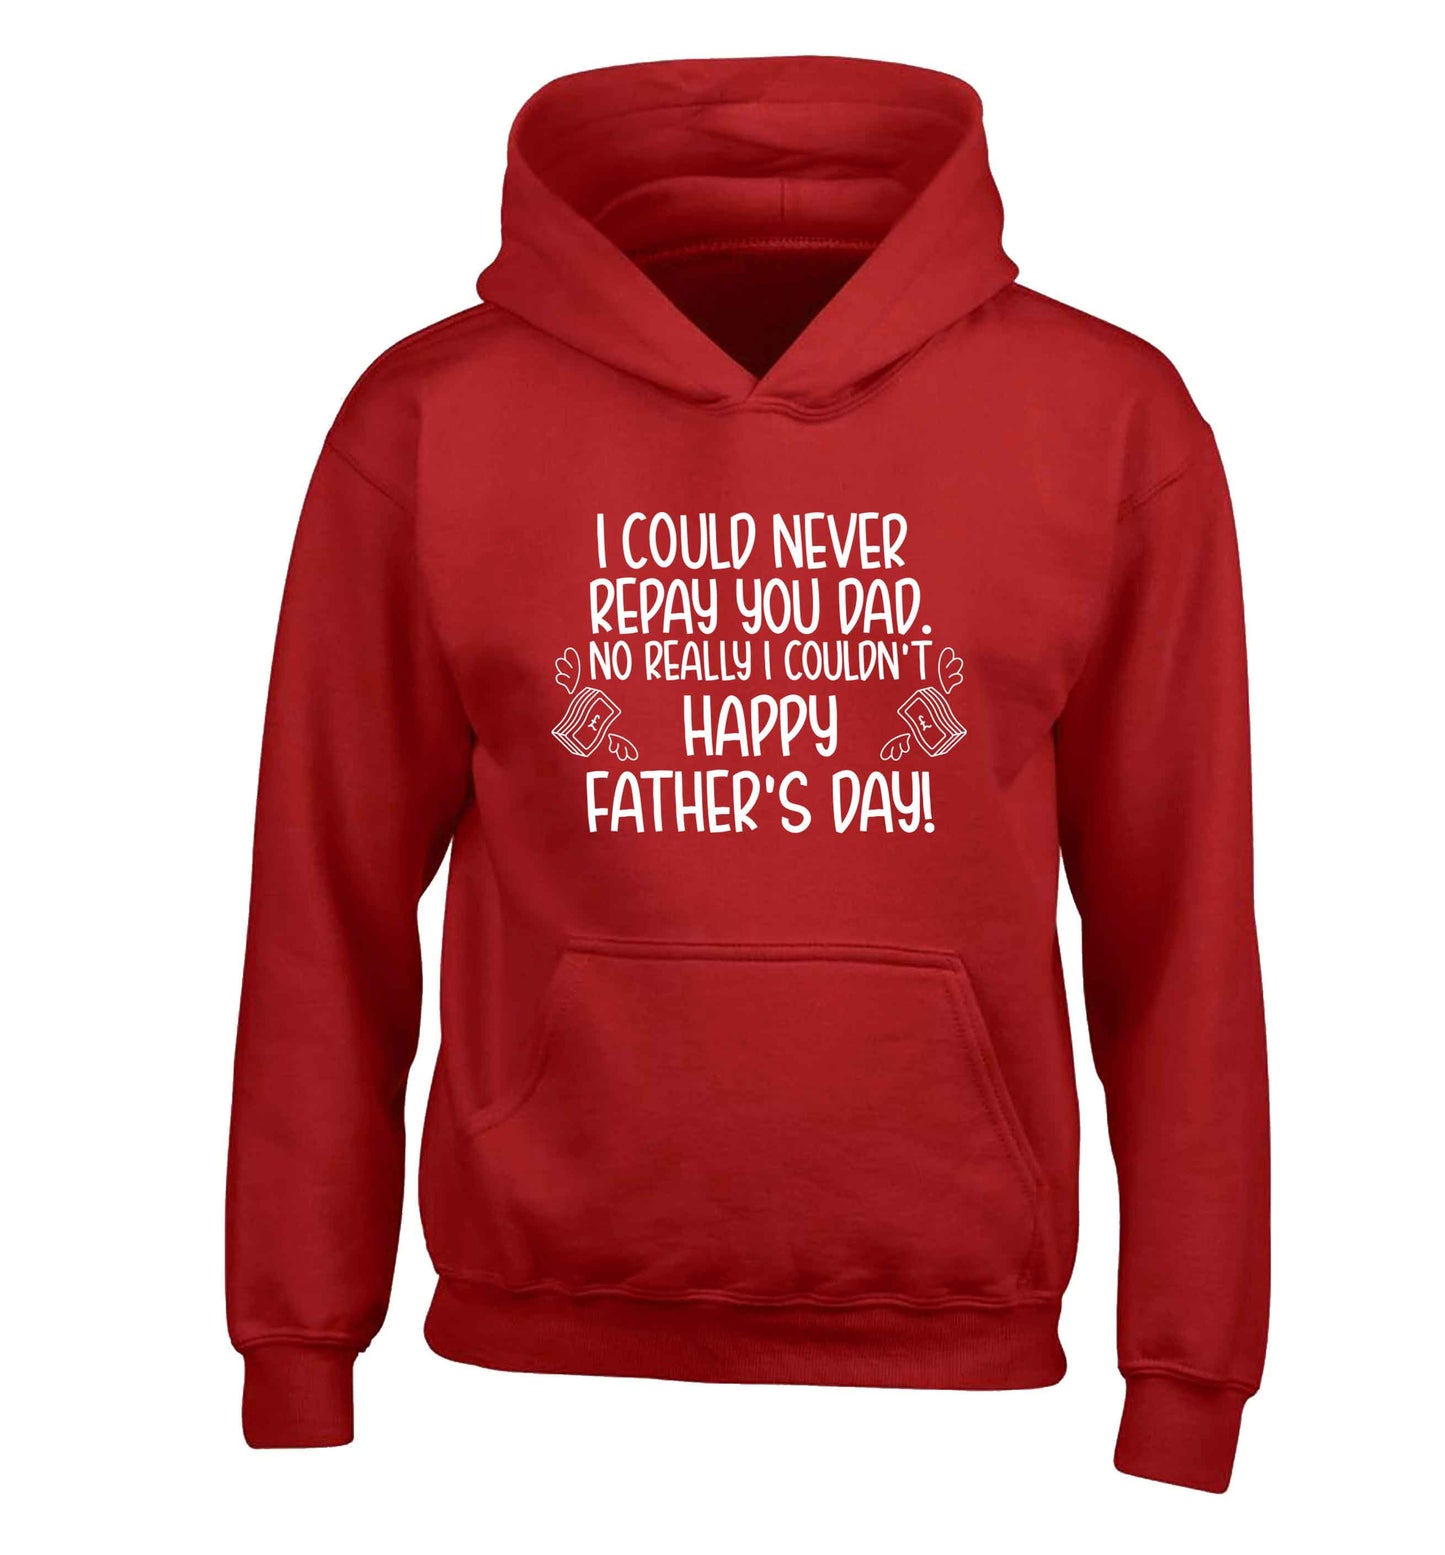 I could never repay you dad. No I really couldn't happy Father's day! children's red hoodie 12-13 Years